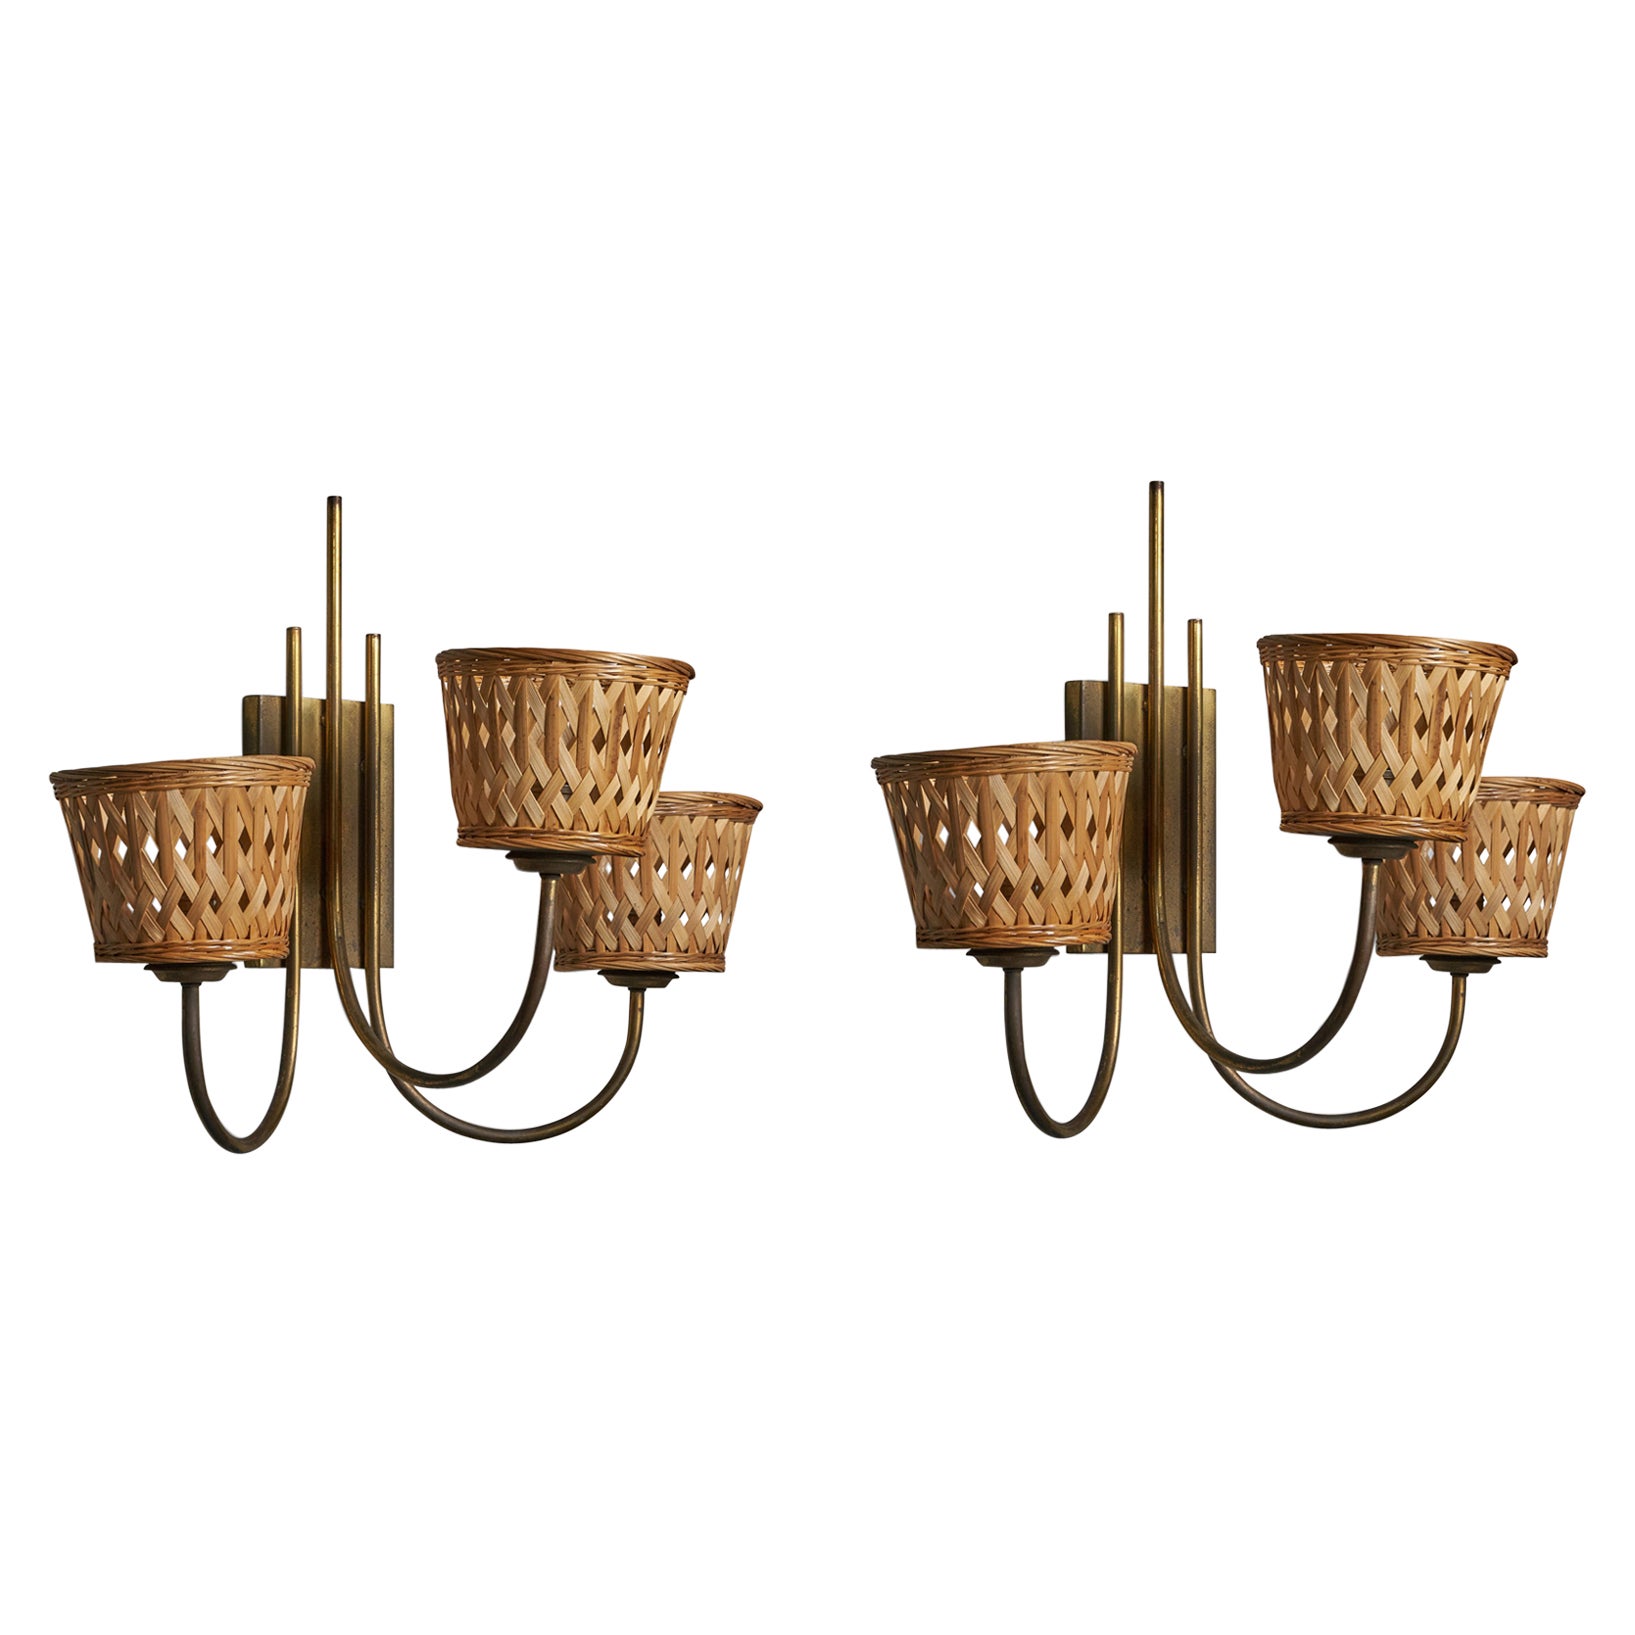 Italian Designer, Sizeable Wall Lights, Brass, Rattan, Italy, 1940s For Sale